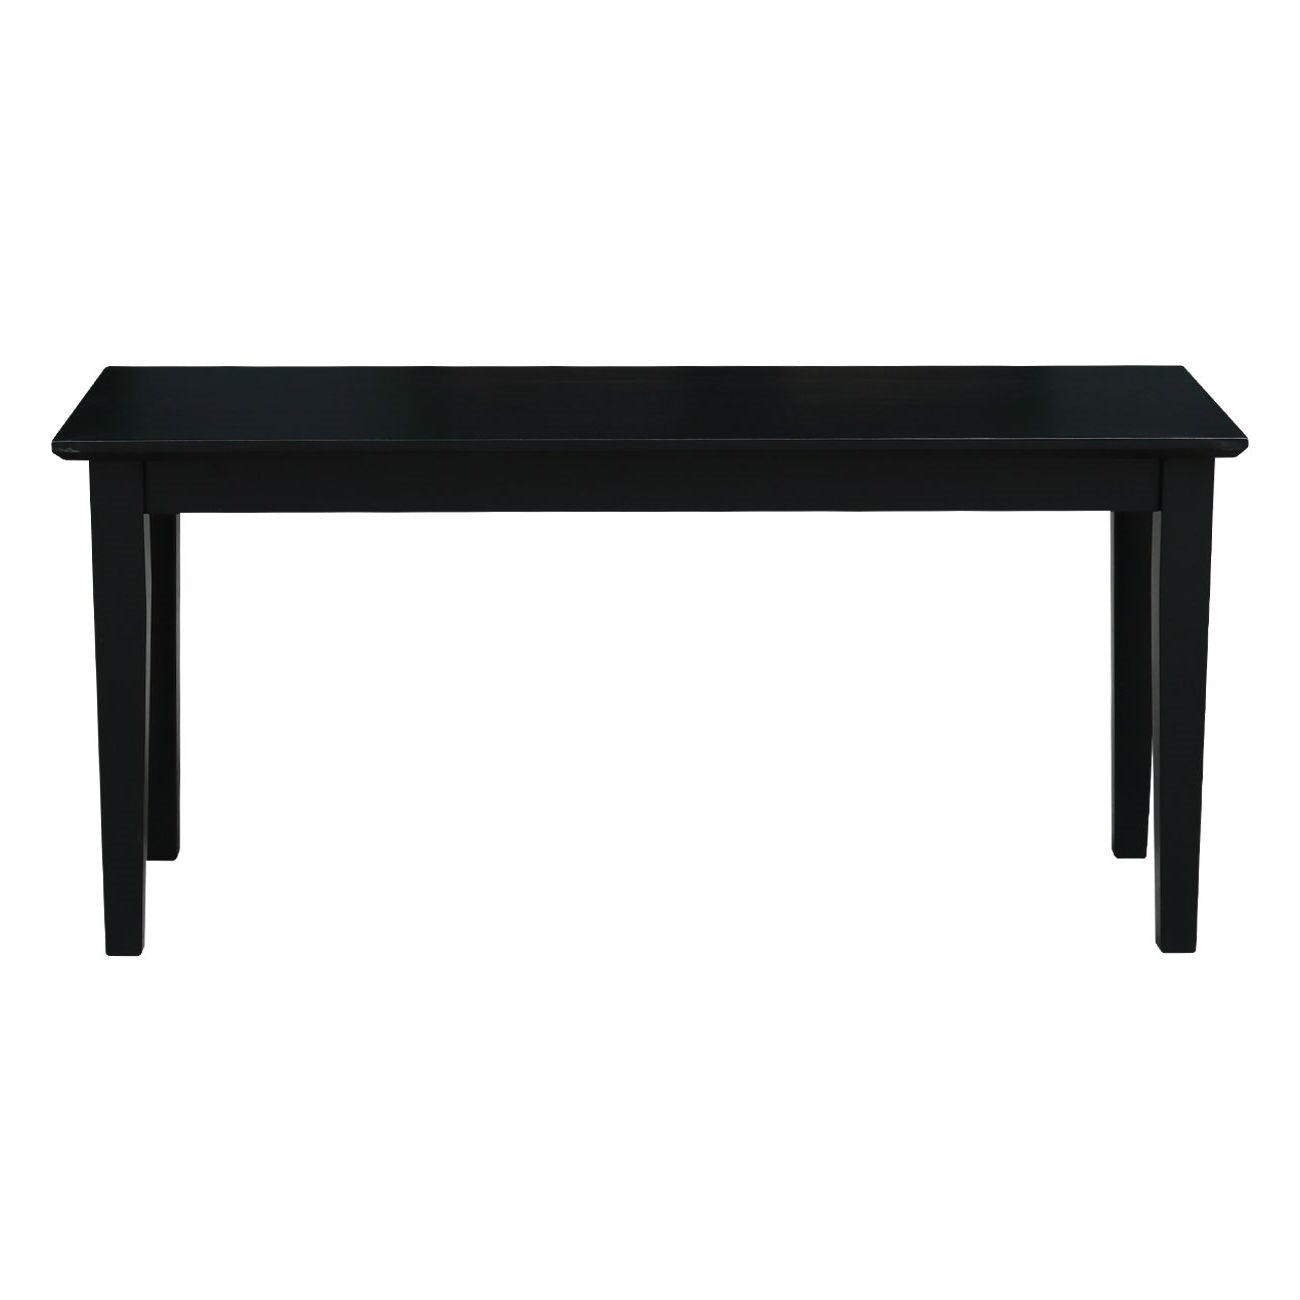 Accents > Benches - Solid Wood Entryway Accent Bench In Black Finish